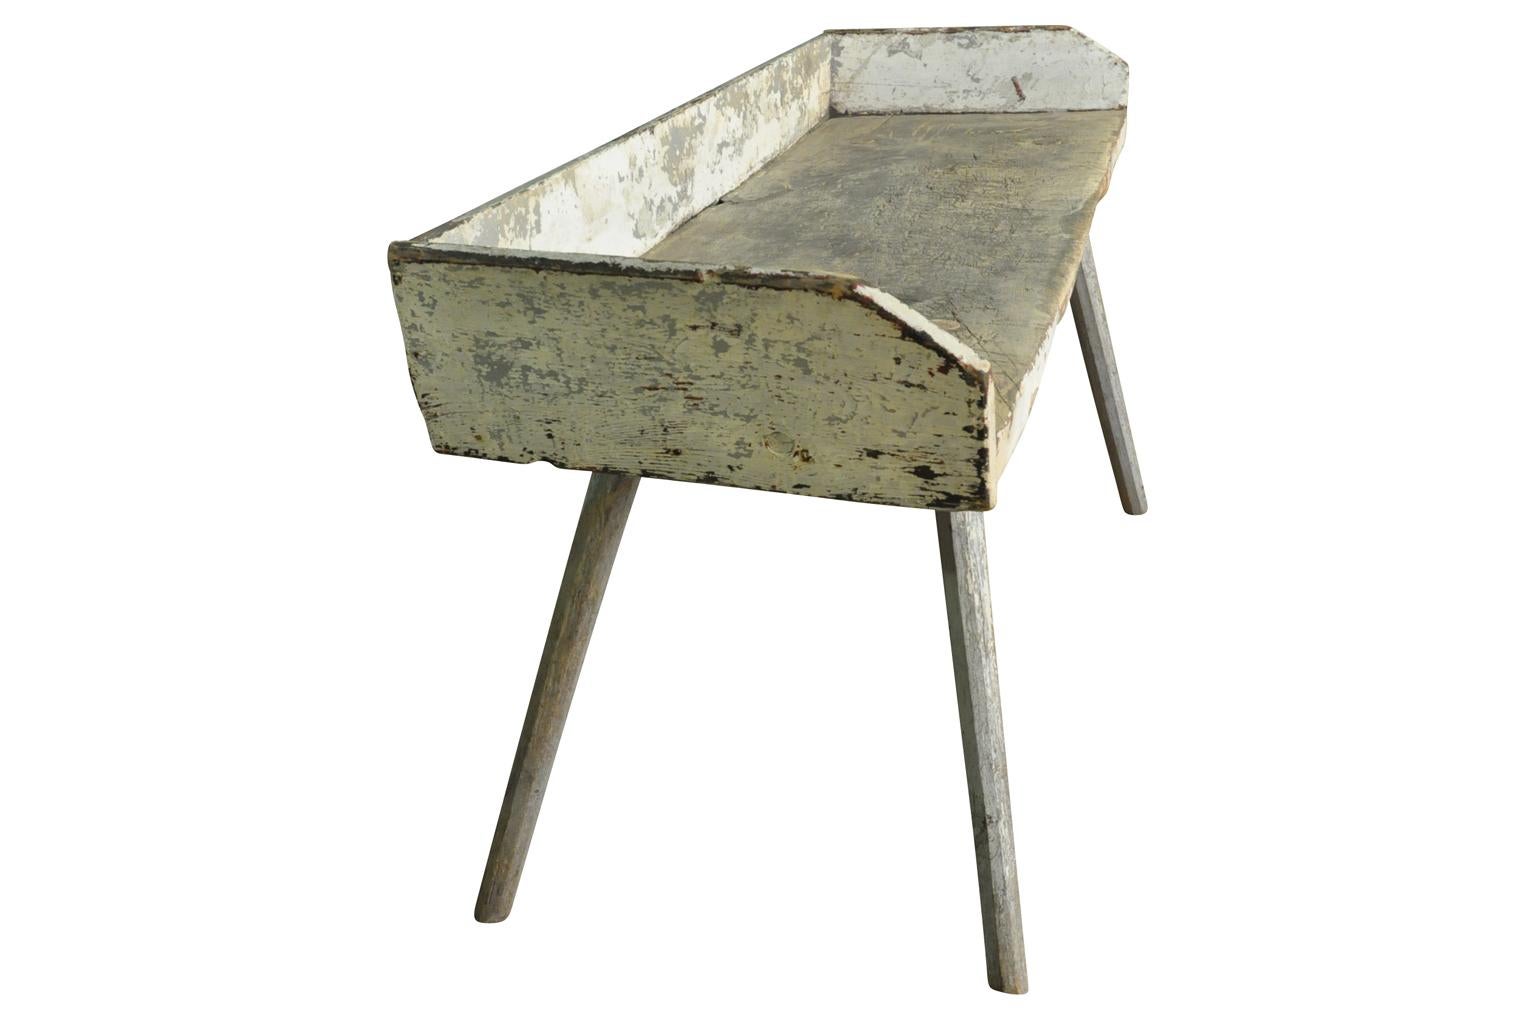 Bleached French Early 19th Century Primitive Work Table